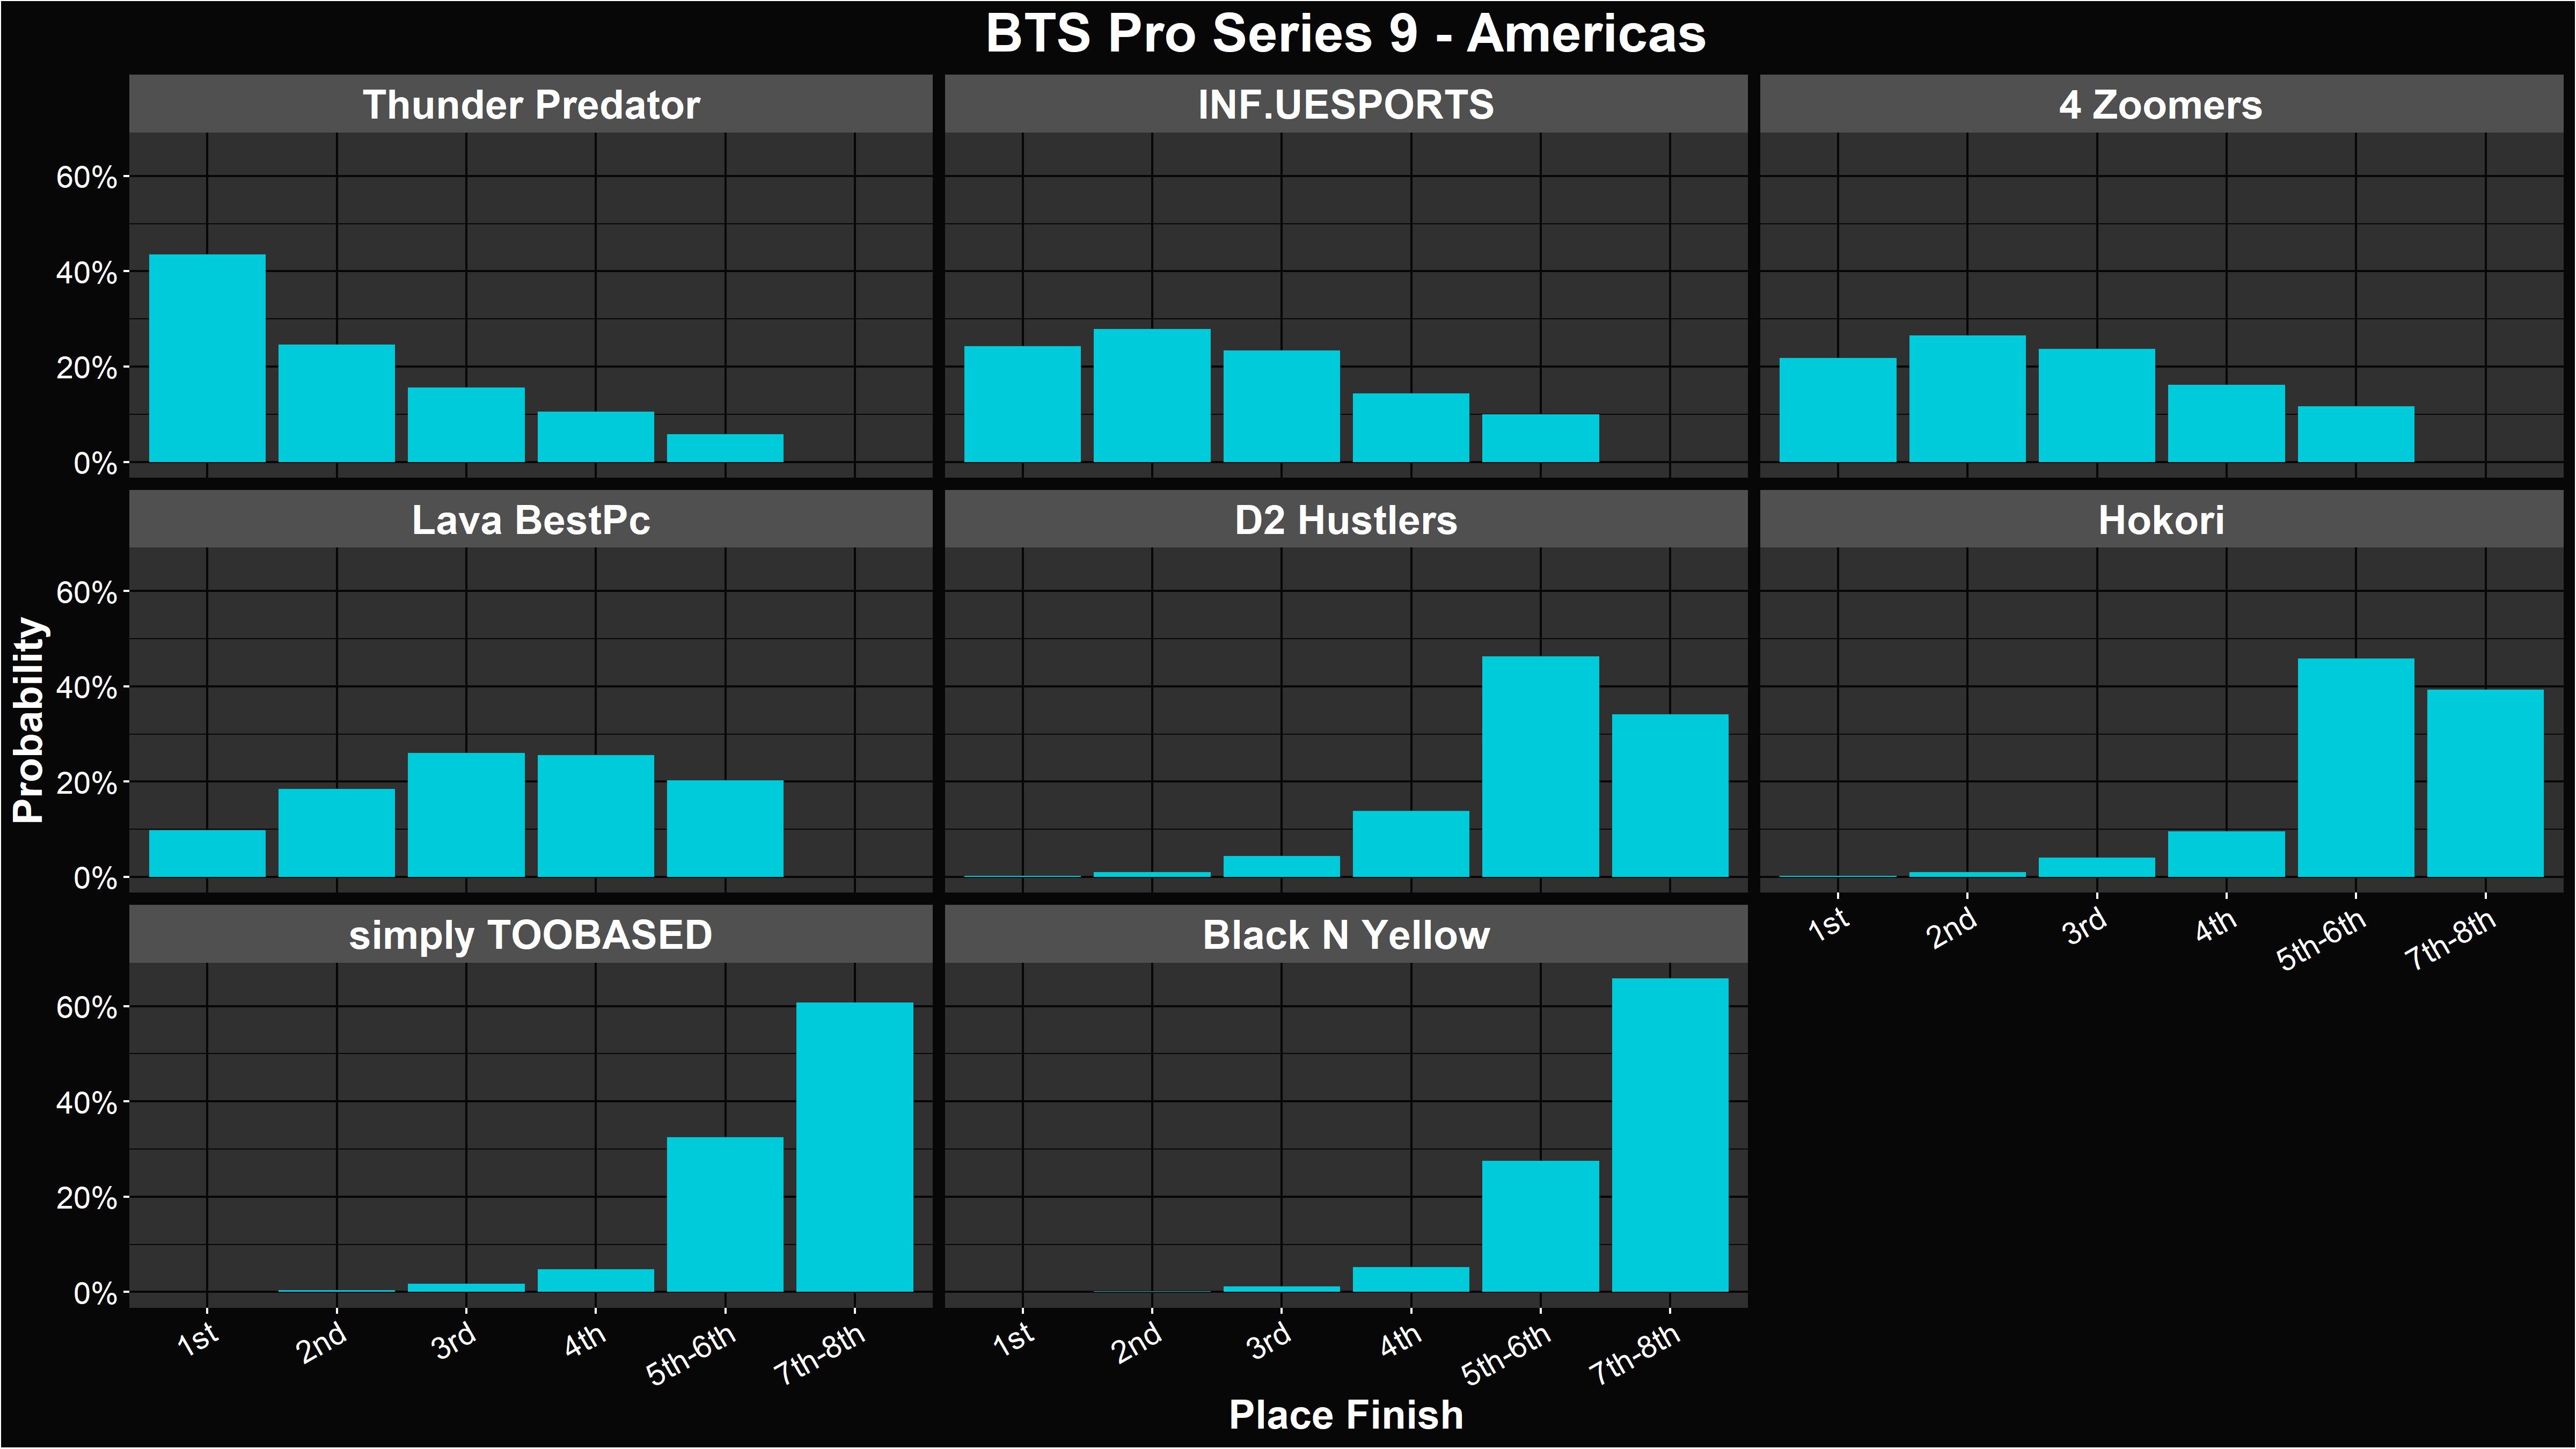 Alacrity's BTS Pro Series 9: Americas Playoff Placement Distributions